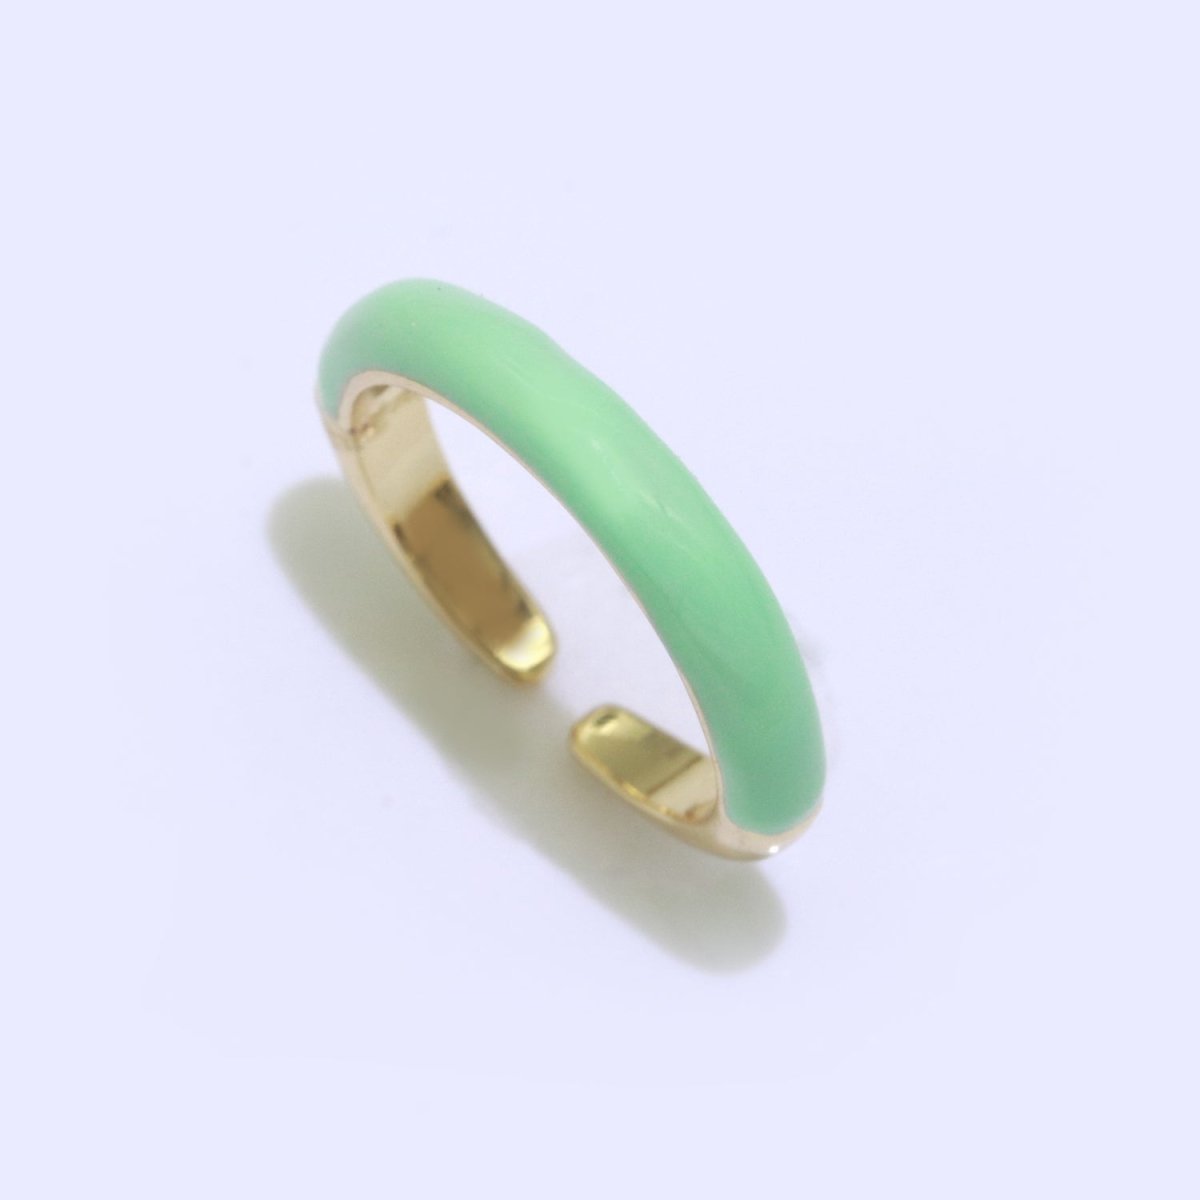 Enamel stacking ring Minimalist Jewelry Gold Filled Open Adjustable Ring for Women S-031 ~ S-039 - DLUXCA